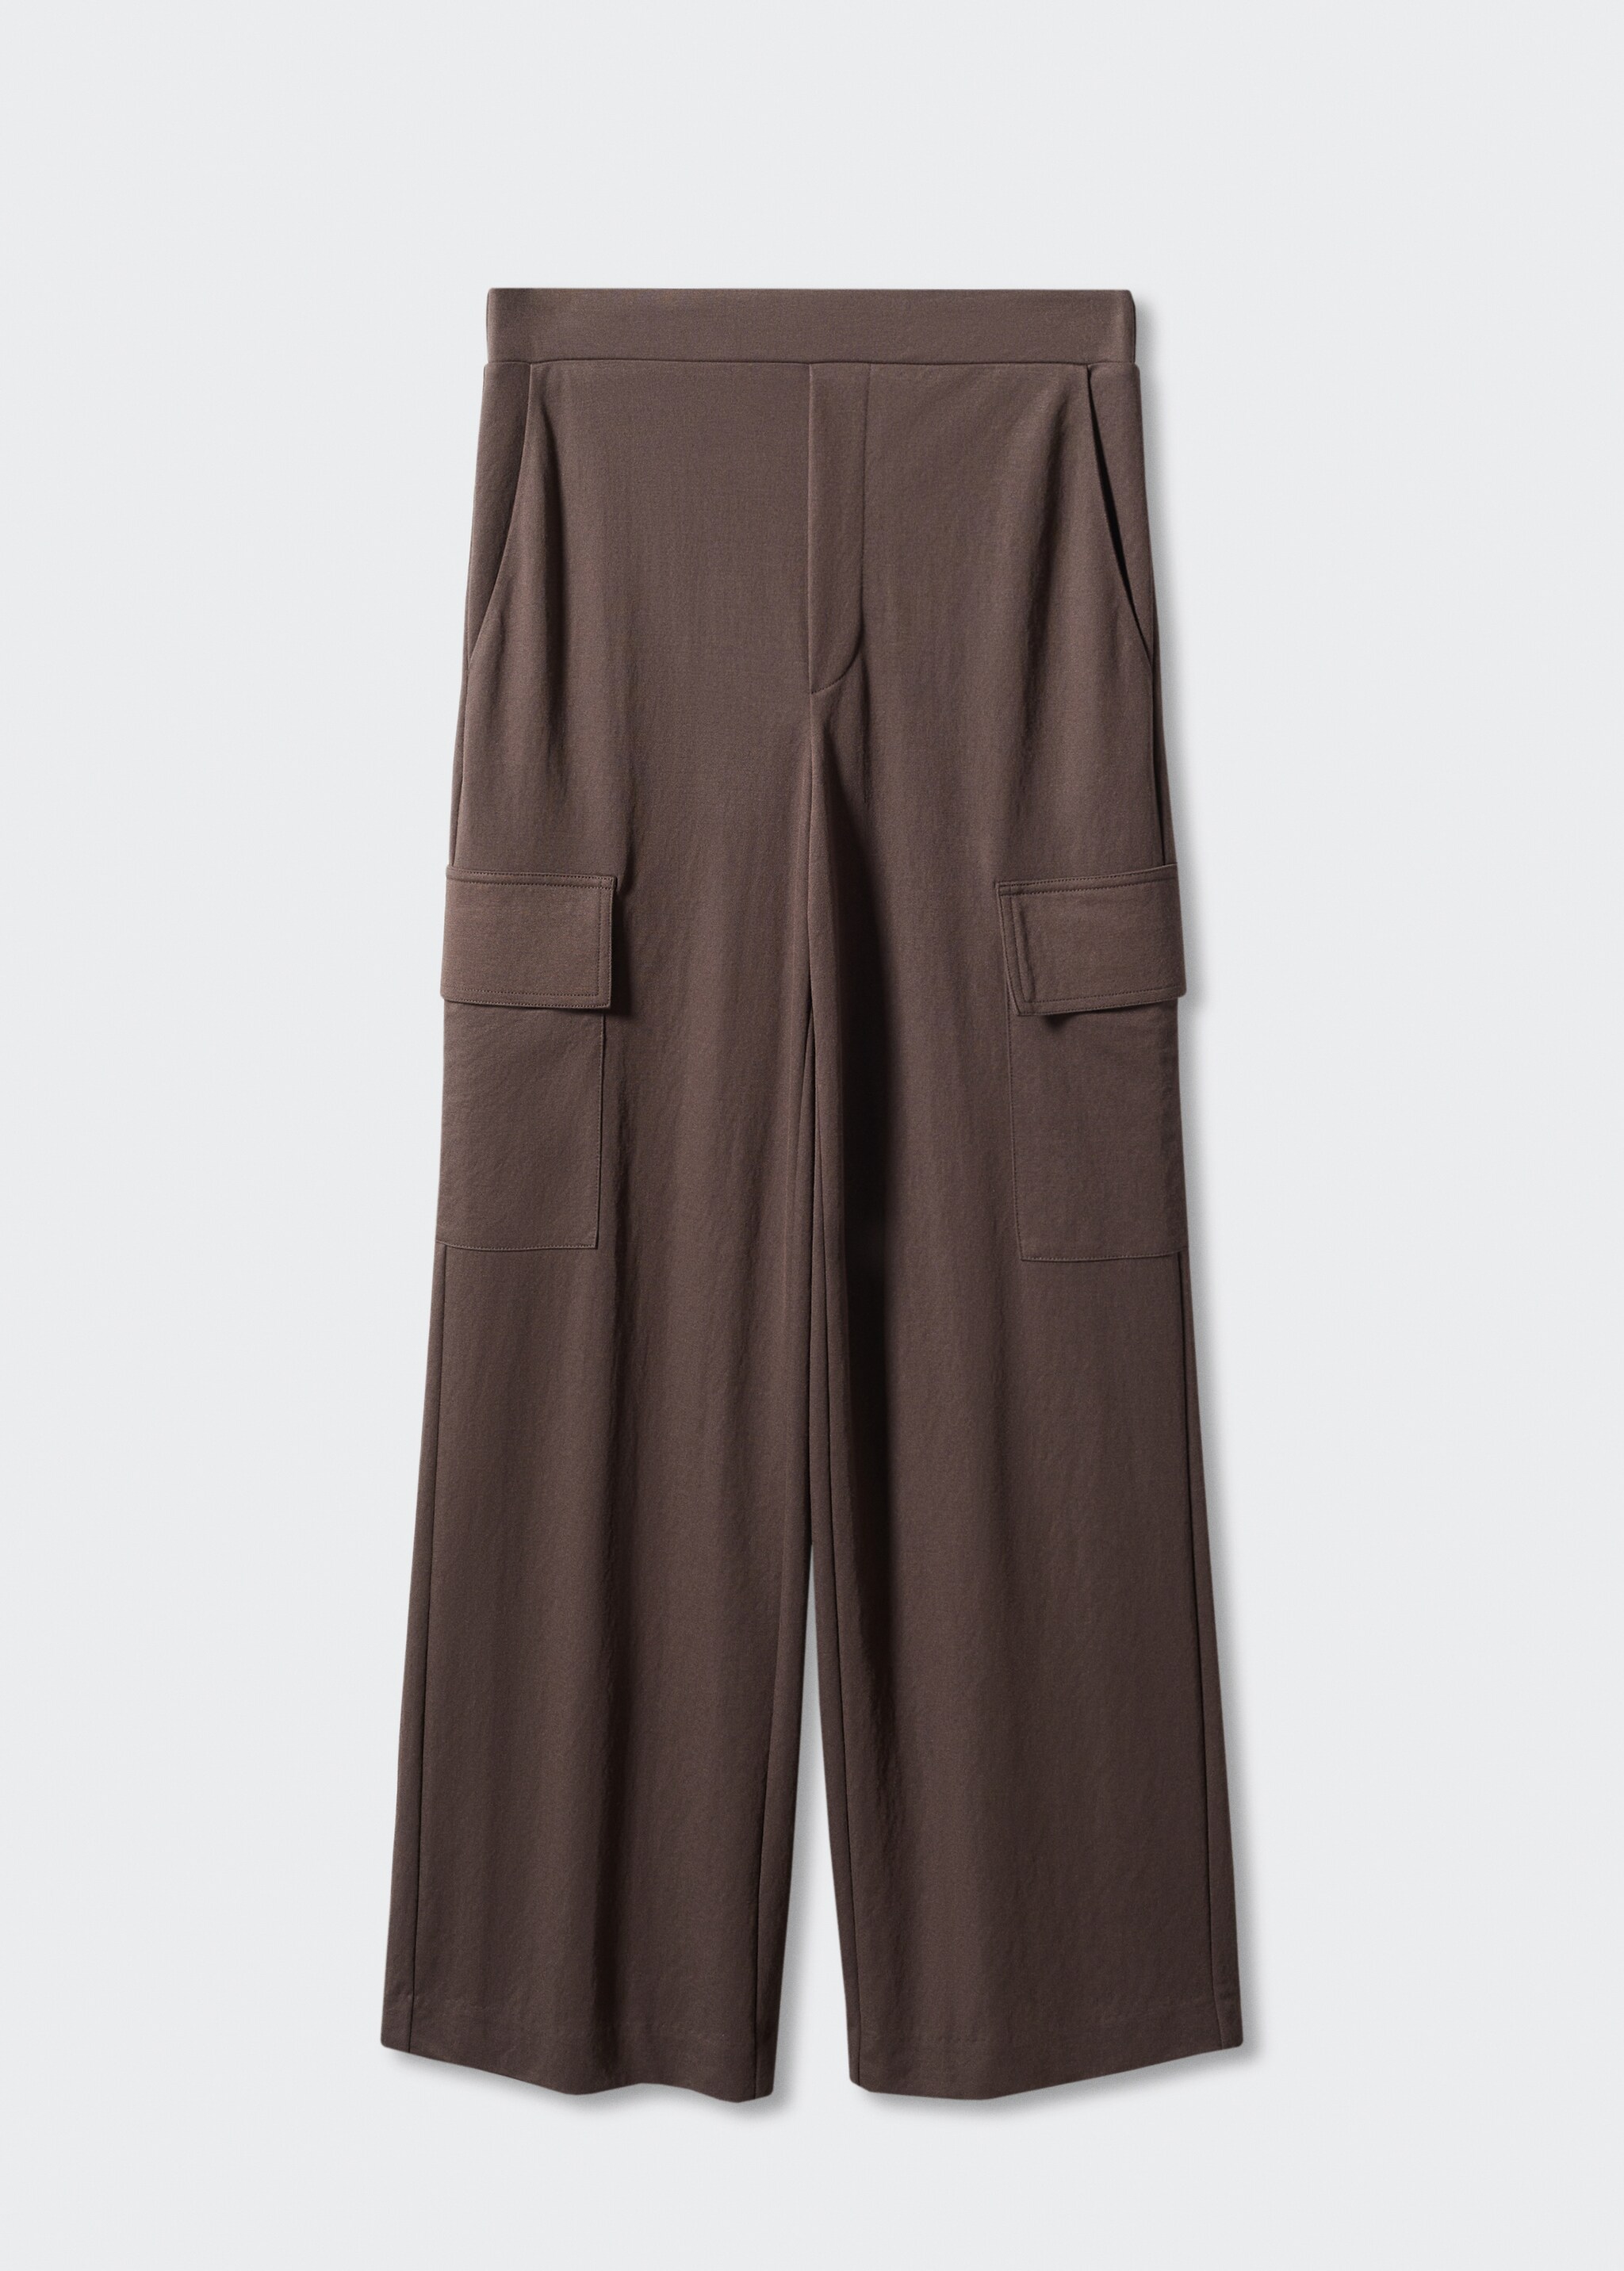 Wideleg cargo style trousers - Article without model